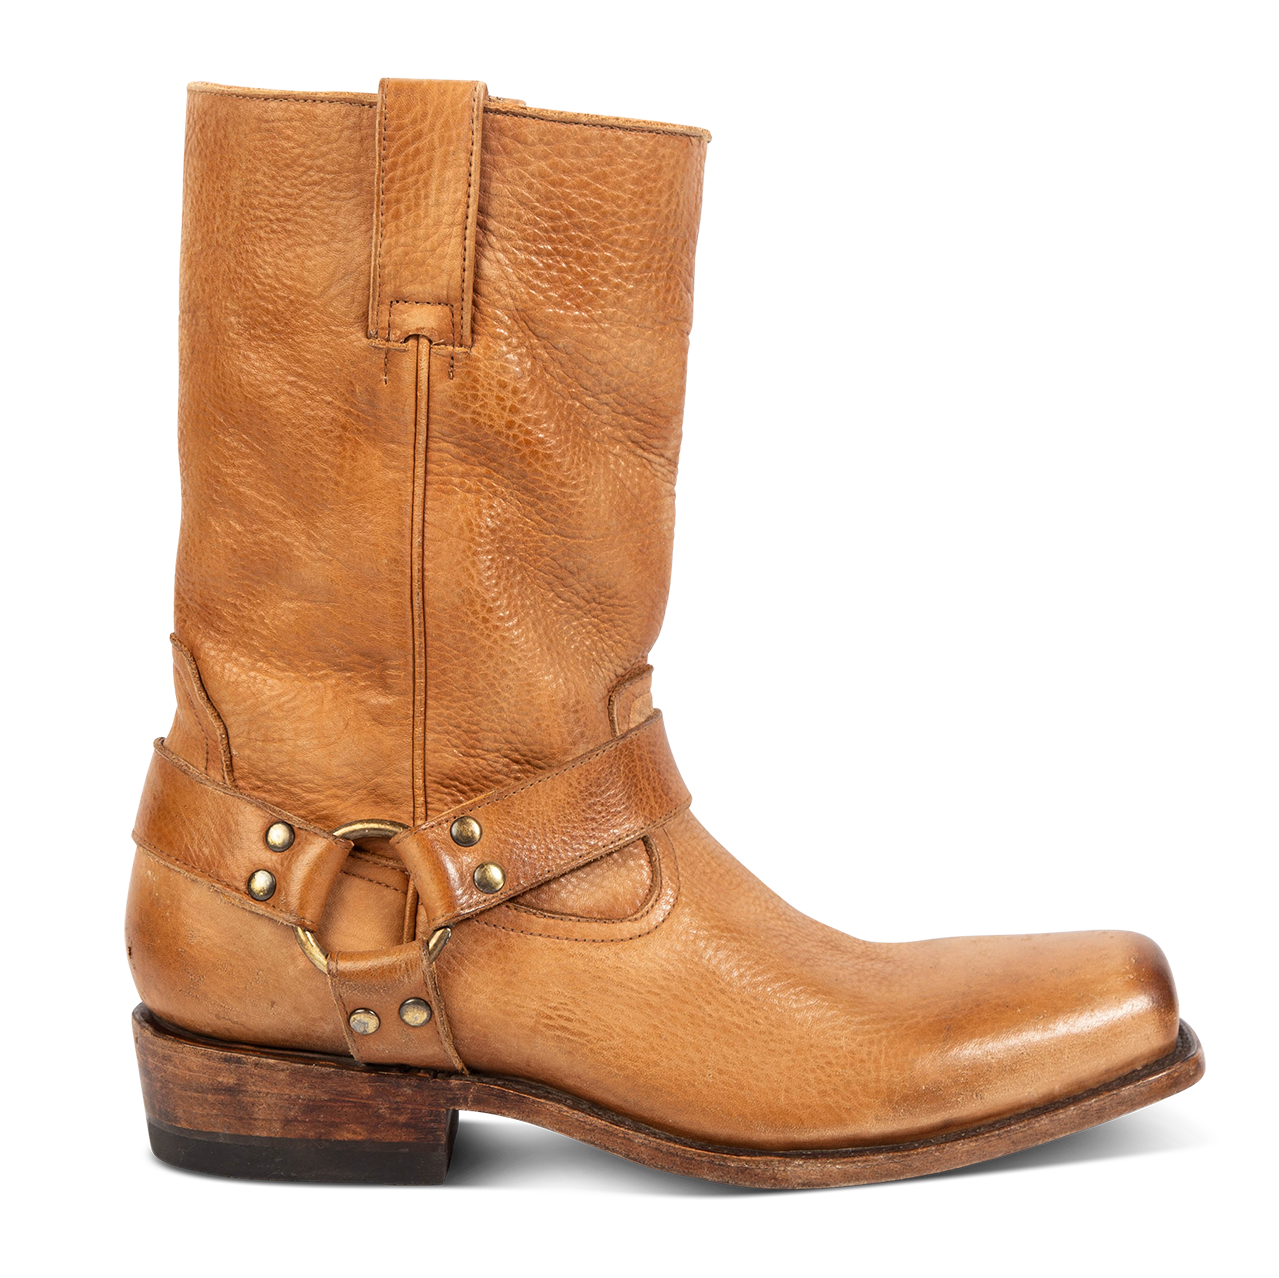 FREEBIRD men's Copperhead banana rock tumbled boot with ankle harness and square toe